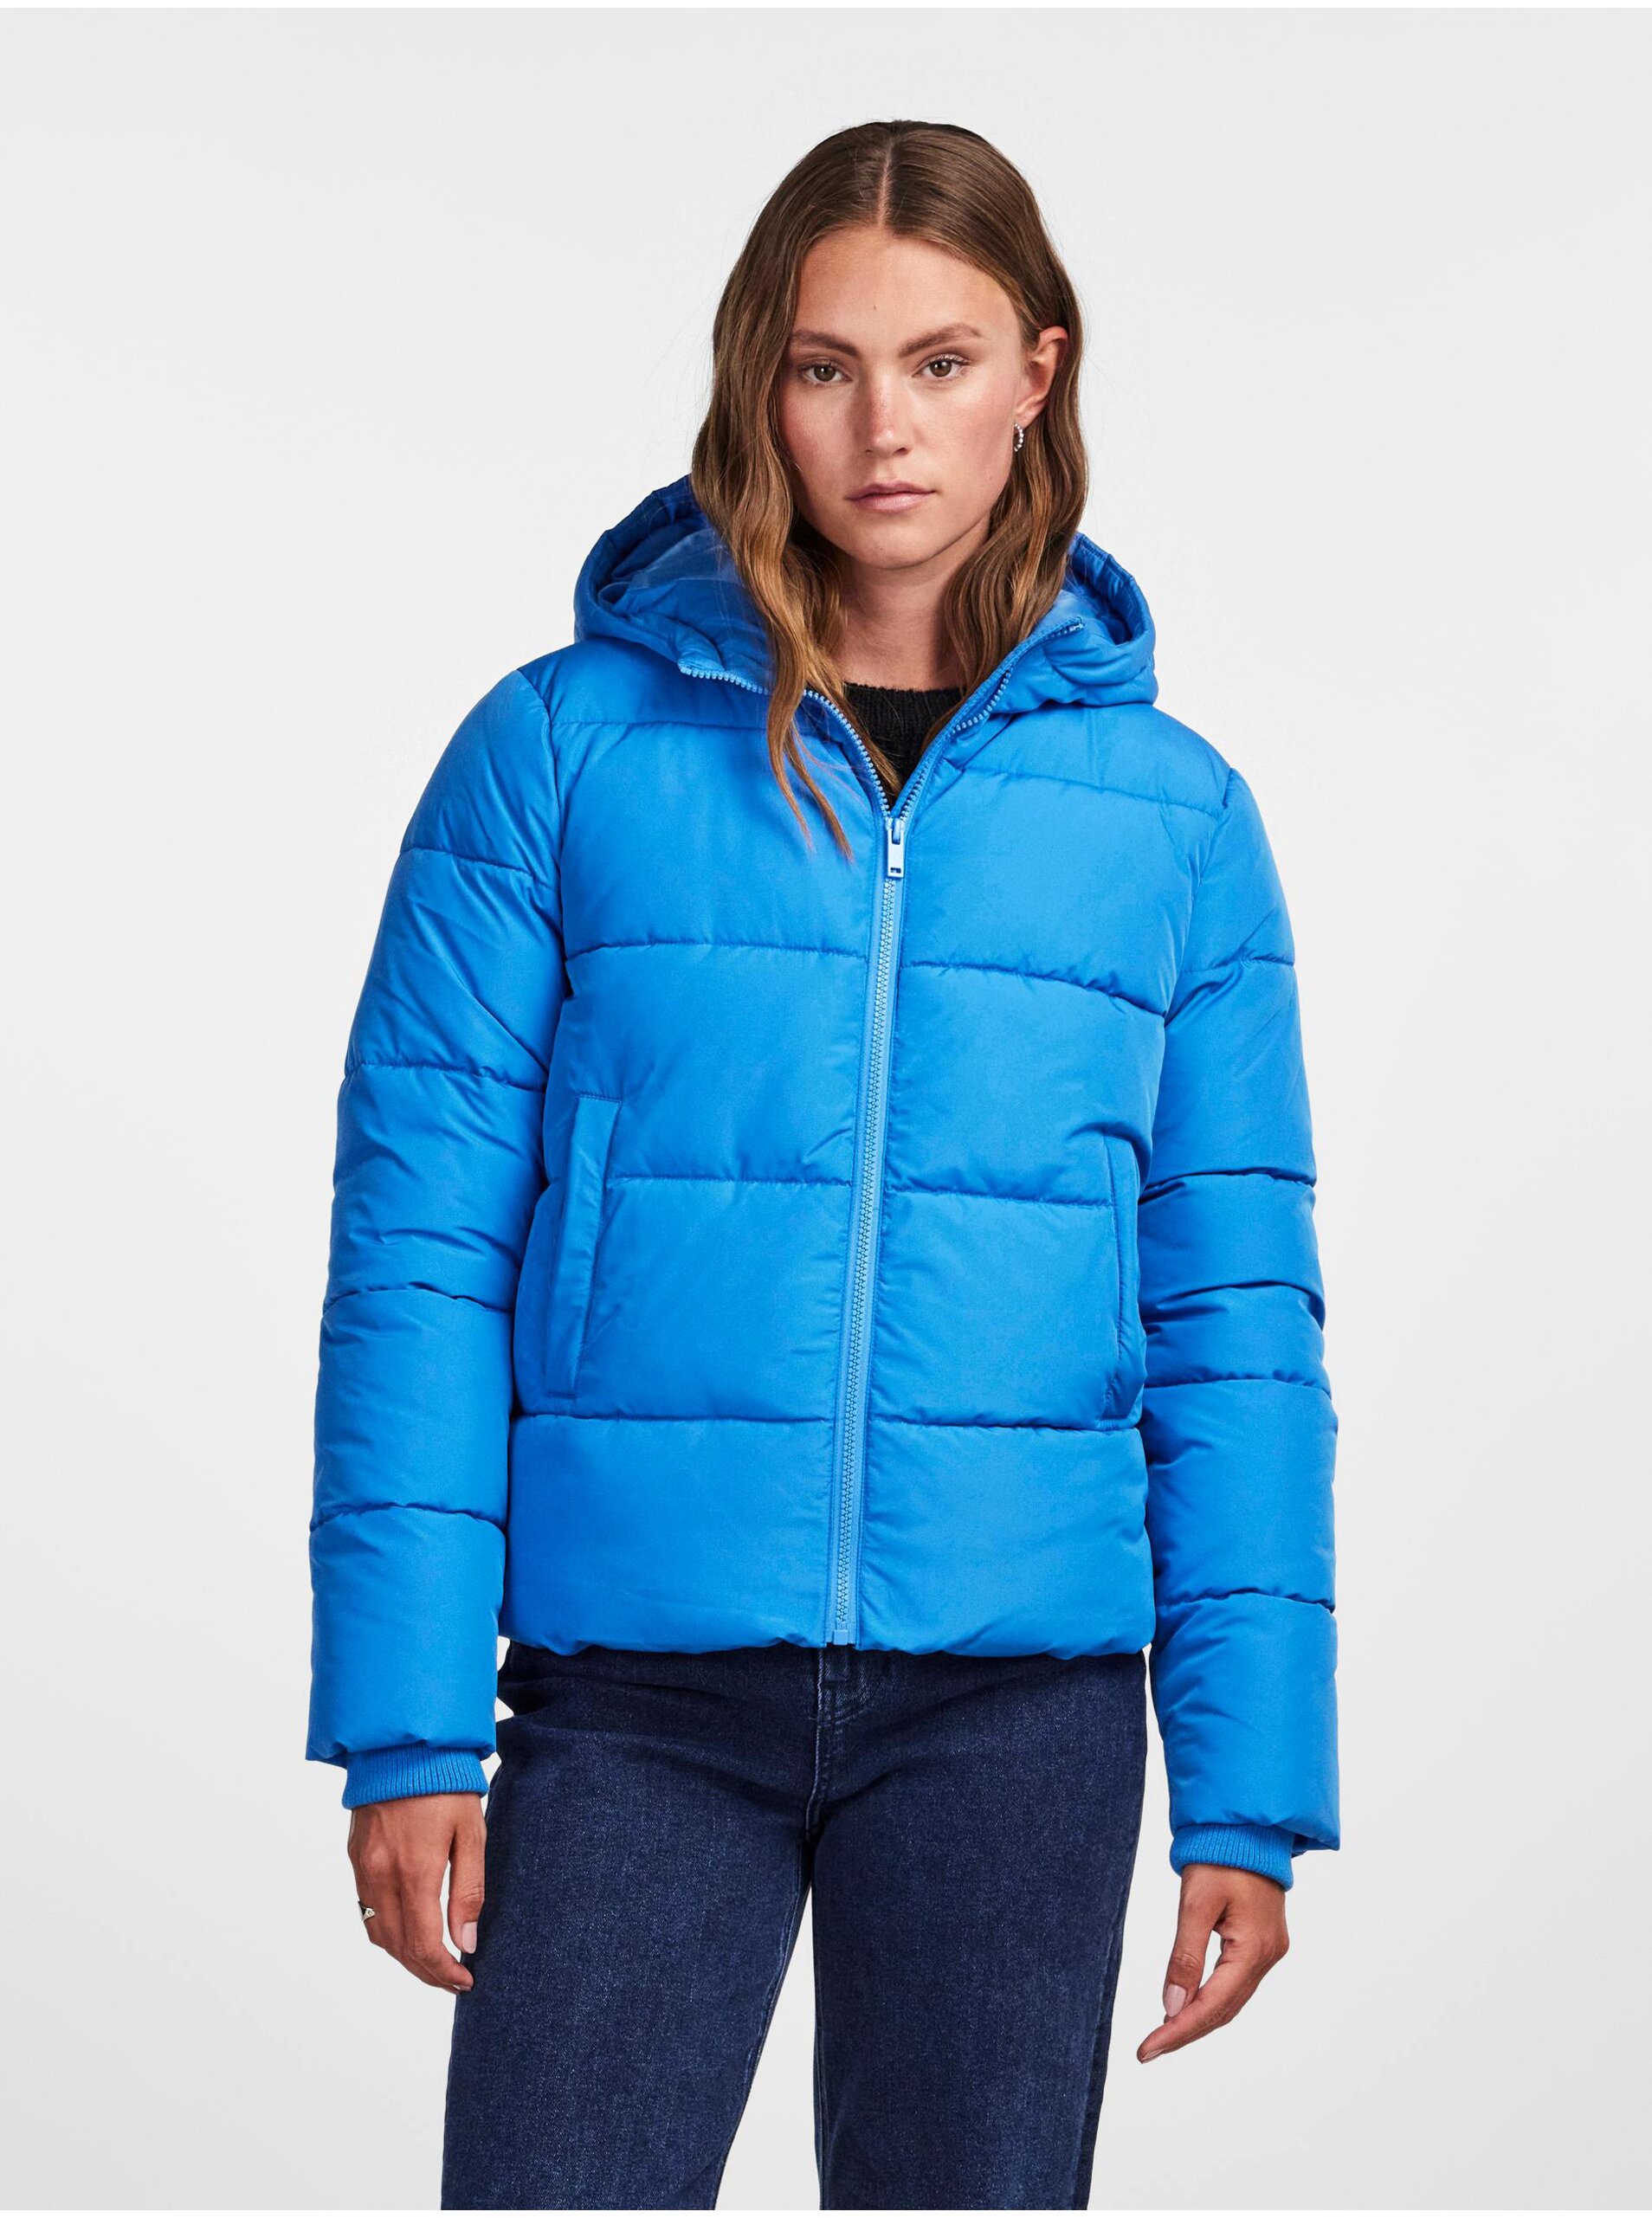 Women's Blue Quilted Jacket Pieces Bee - Women